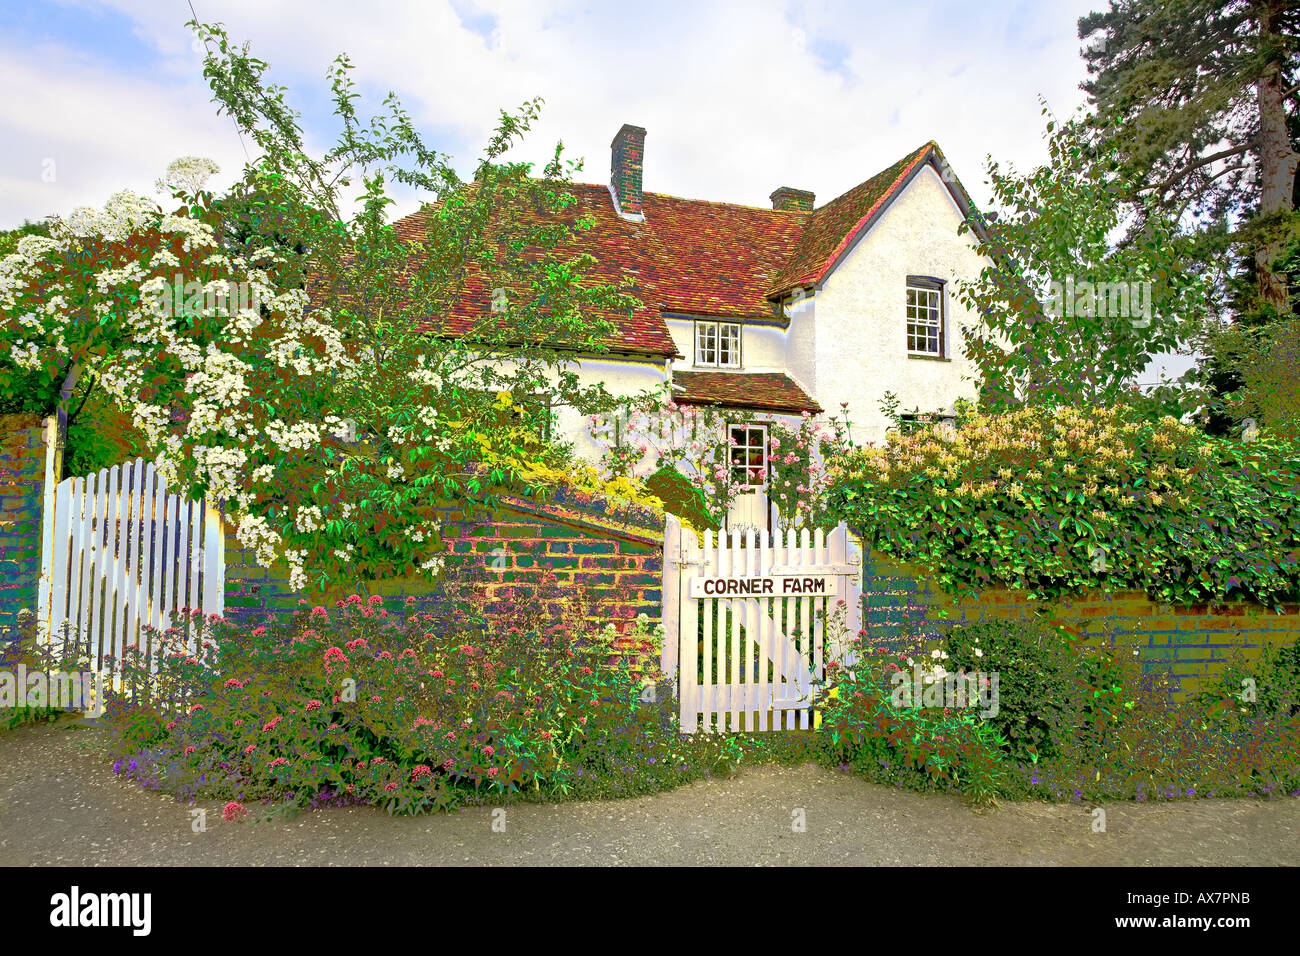 Picturesque rural cottage in summer walled garden with flowers Photoshop filter applied Stock Photo